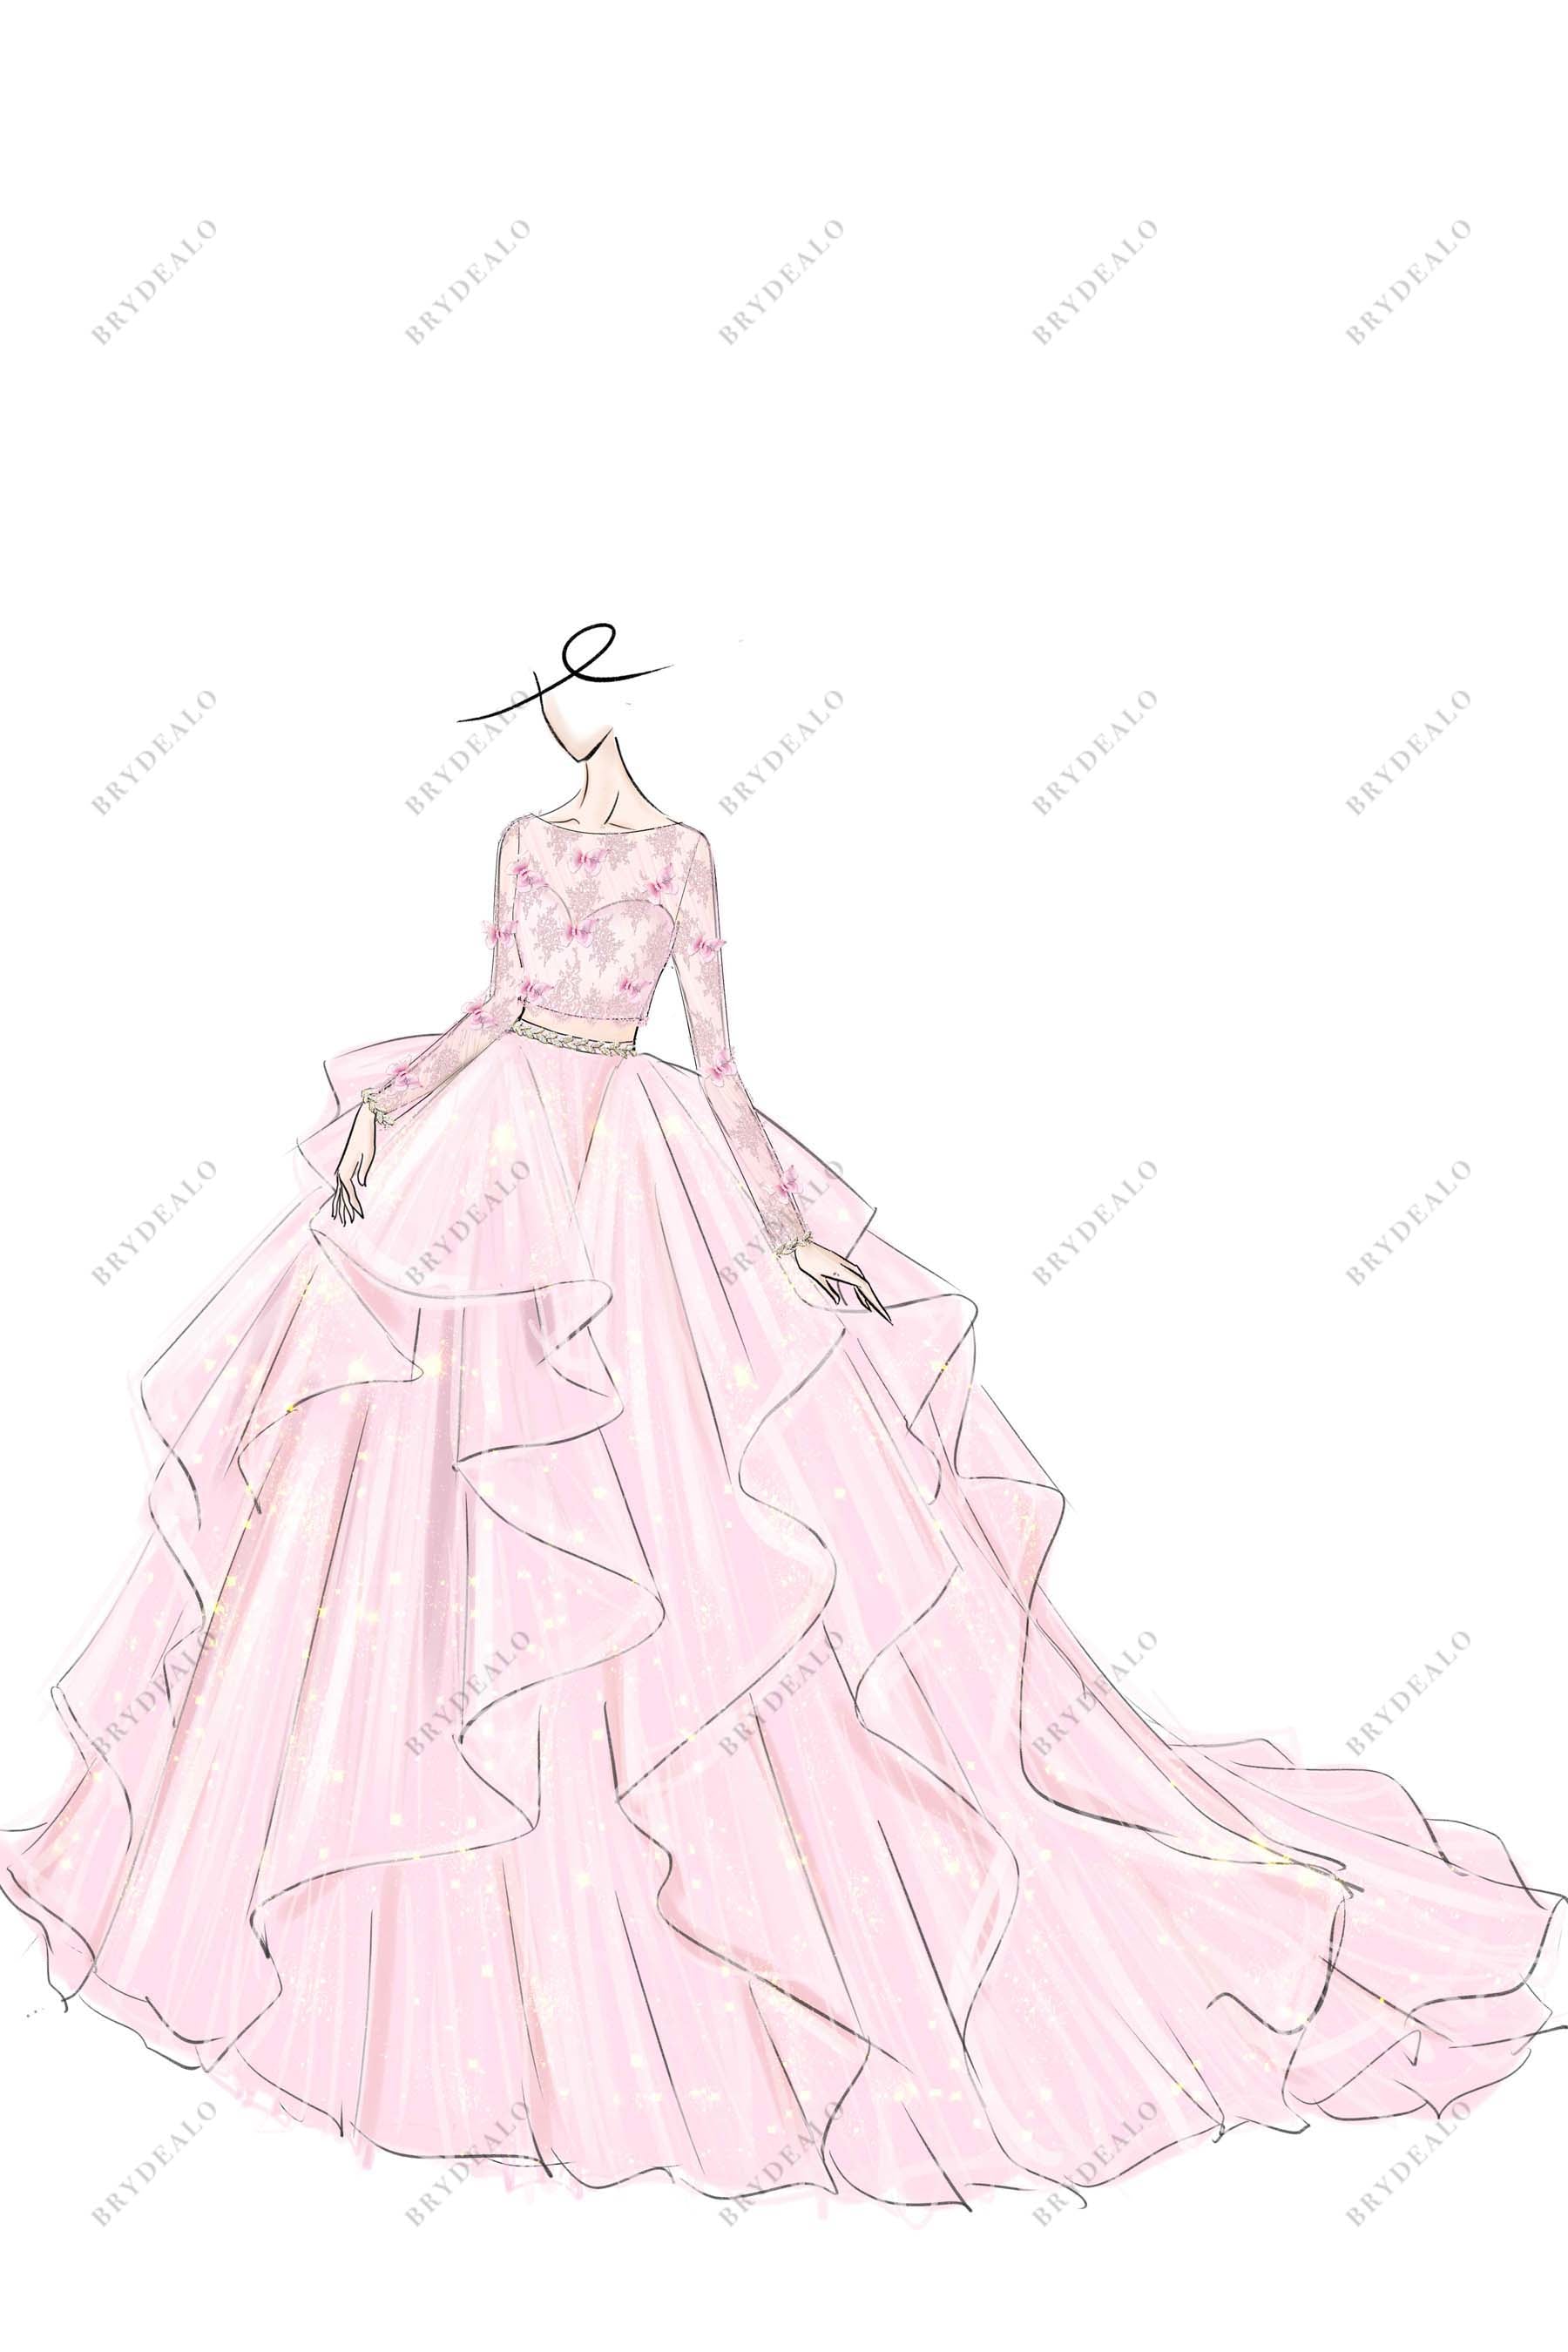 Pink Lace Ruffled Ball Gown Two-piece Bridal Dress Sketch